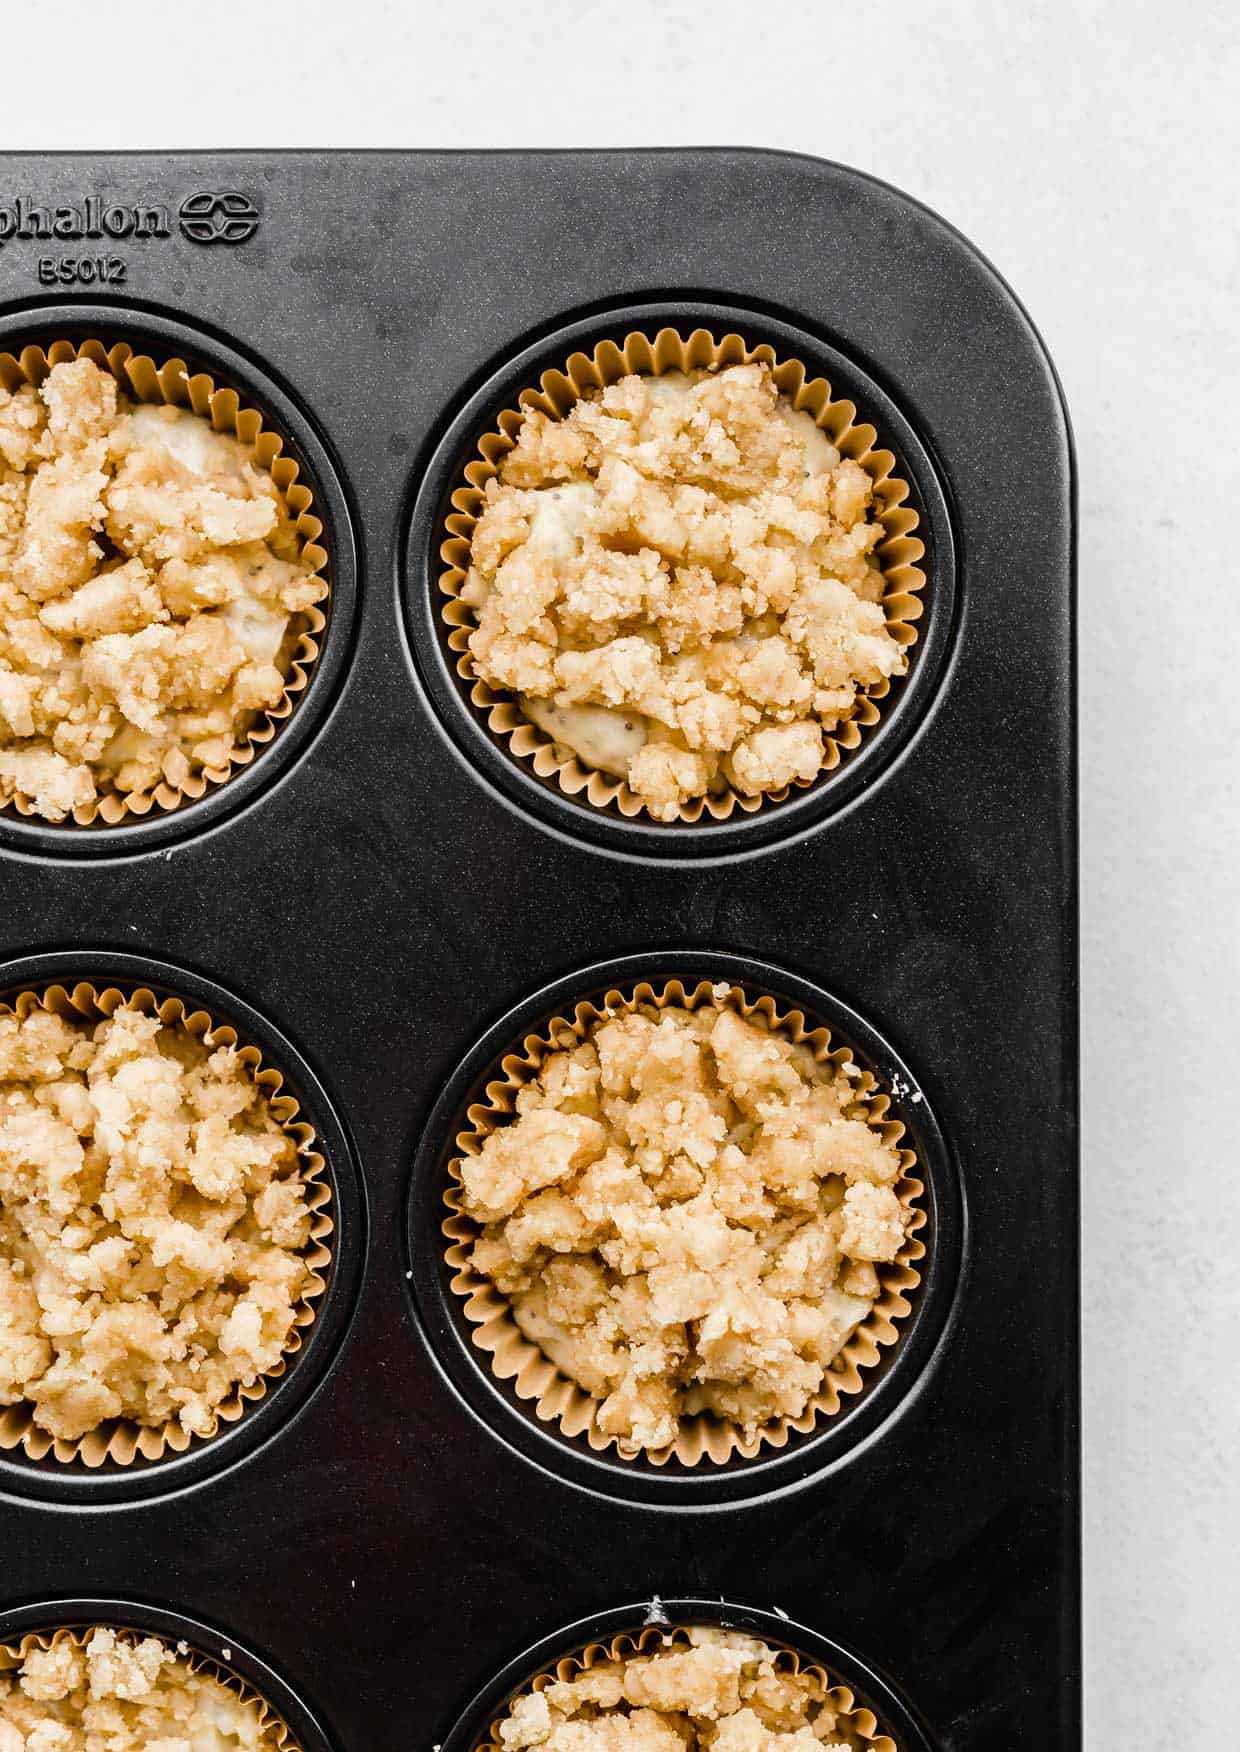 Crumb topping over Lemon Poppy Seed Muffin batter in a muffin tin.